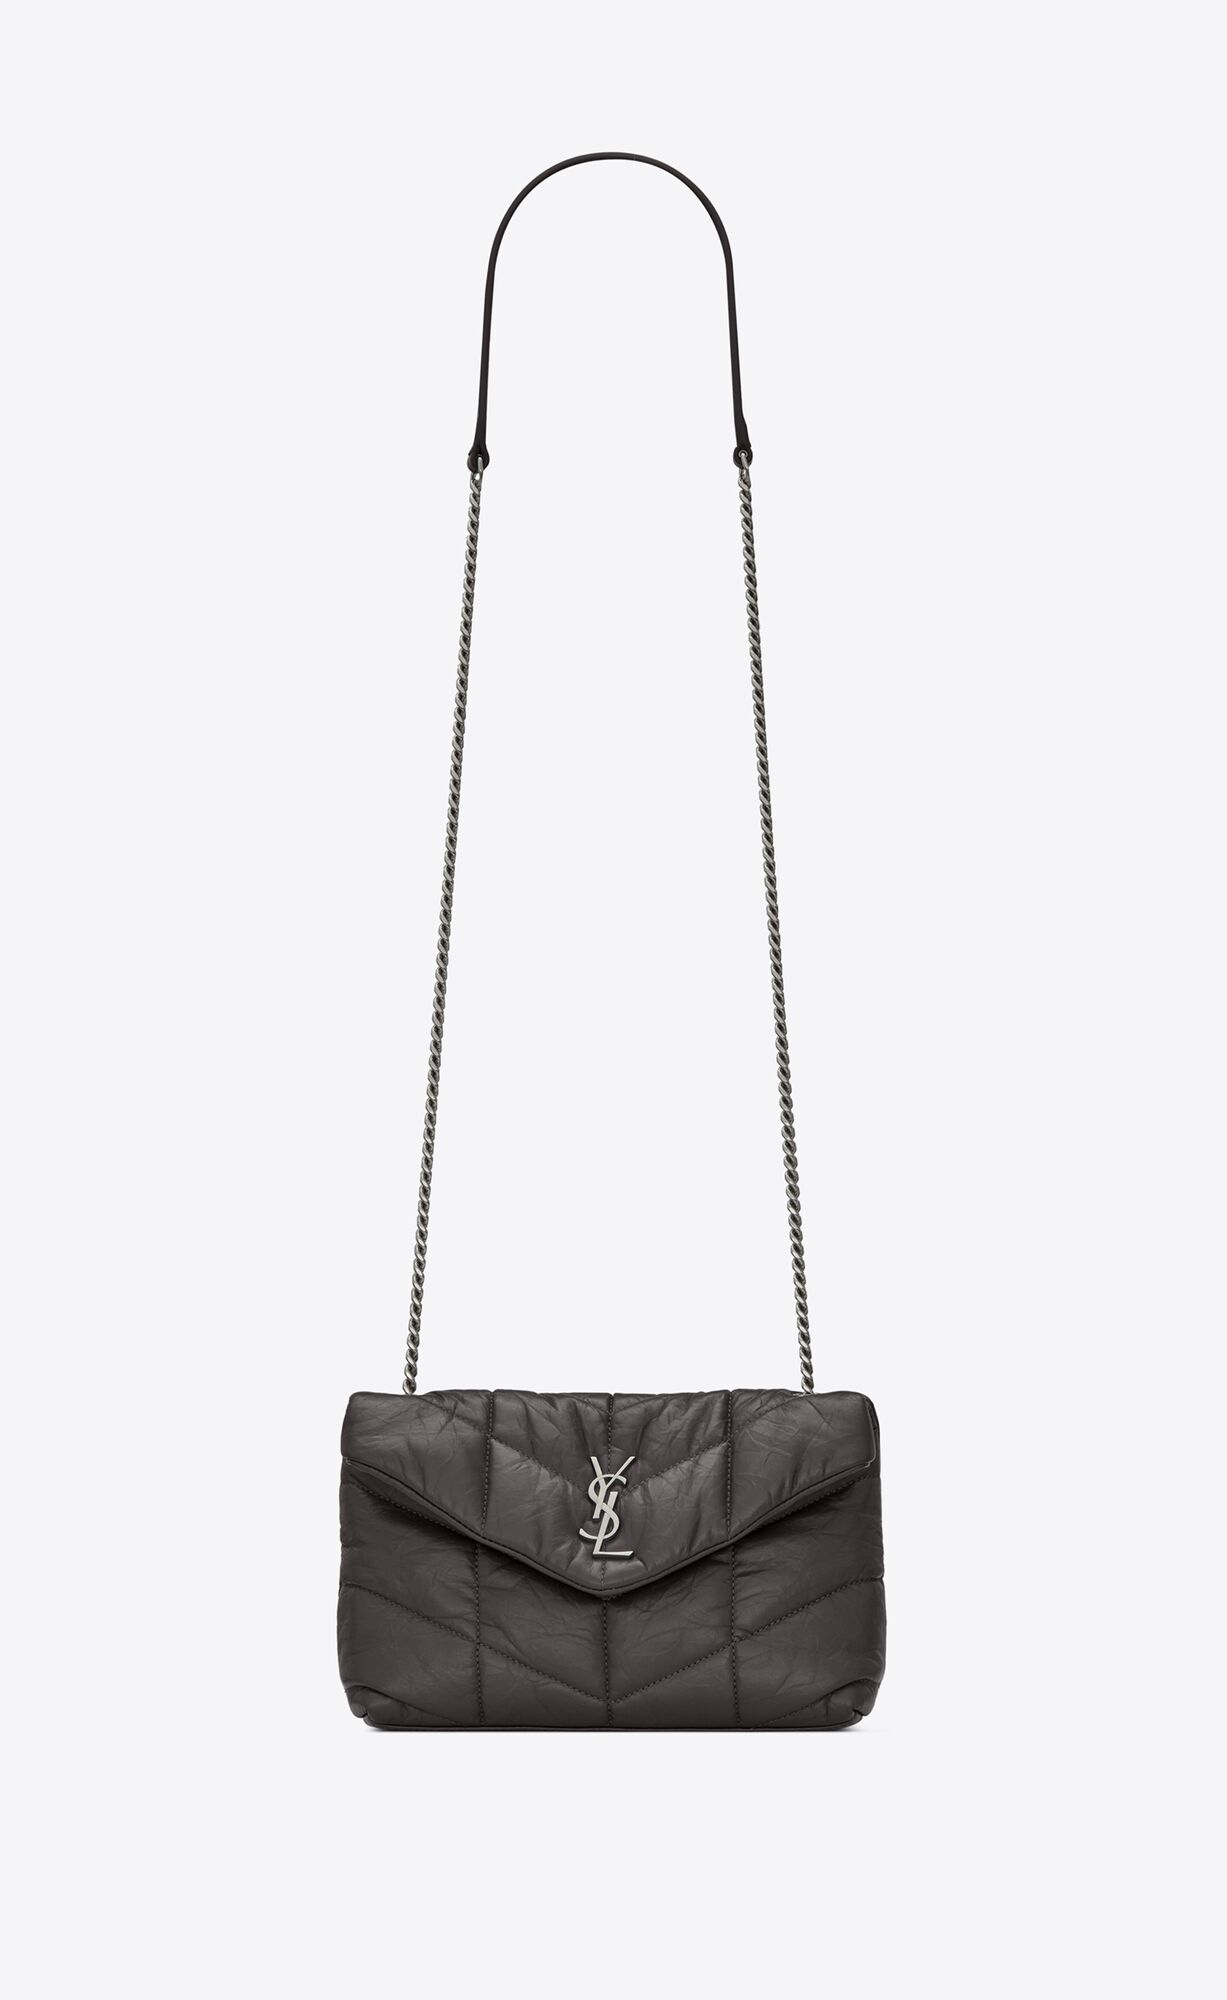 Saint Laurent Puffer Toy Bag In Quilted Wrinkled Matte Leather – Storm – 6203331UQ061112